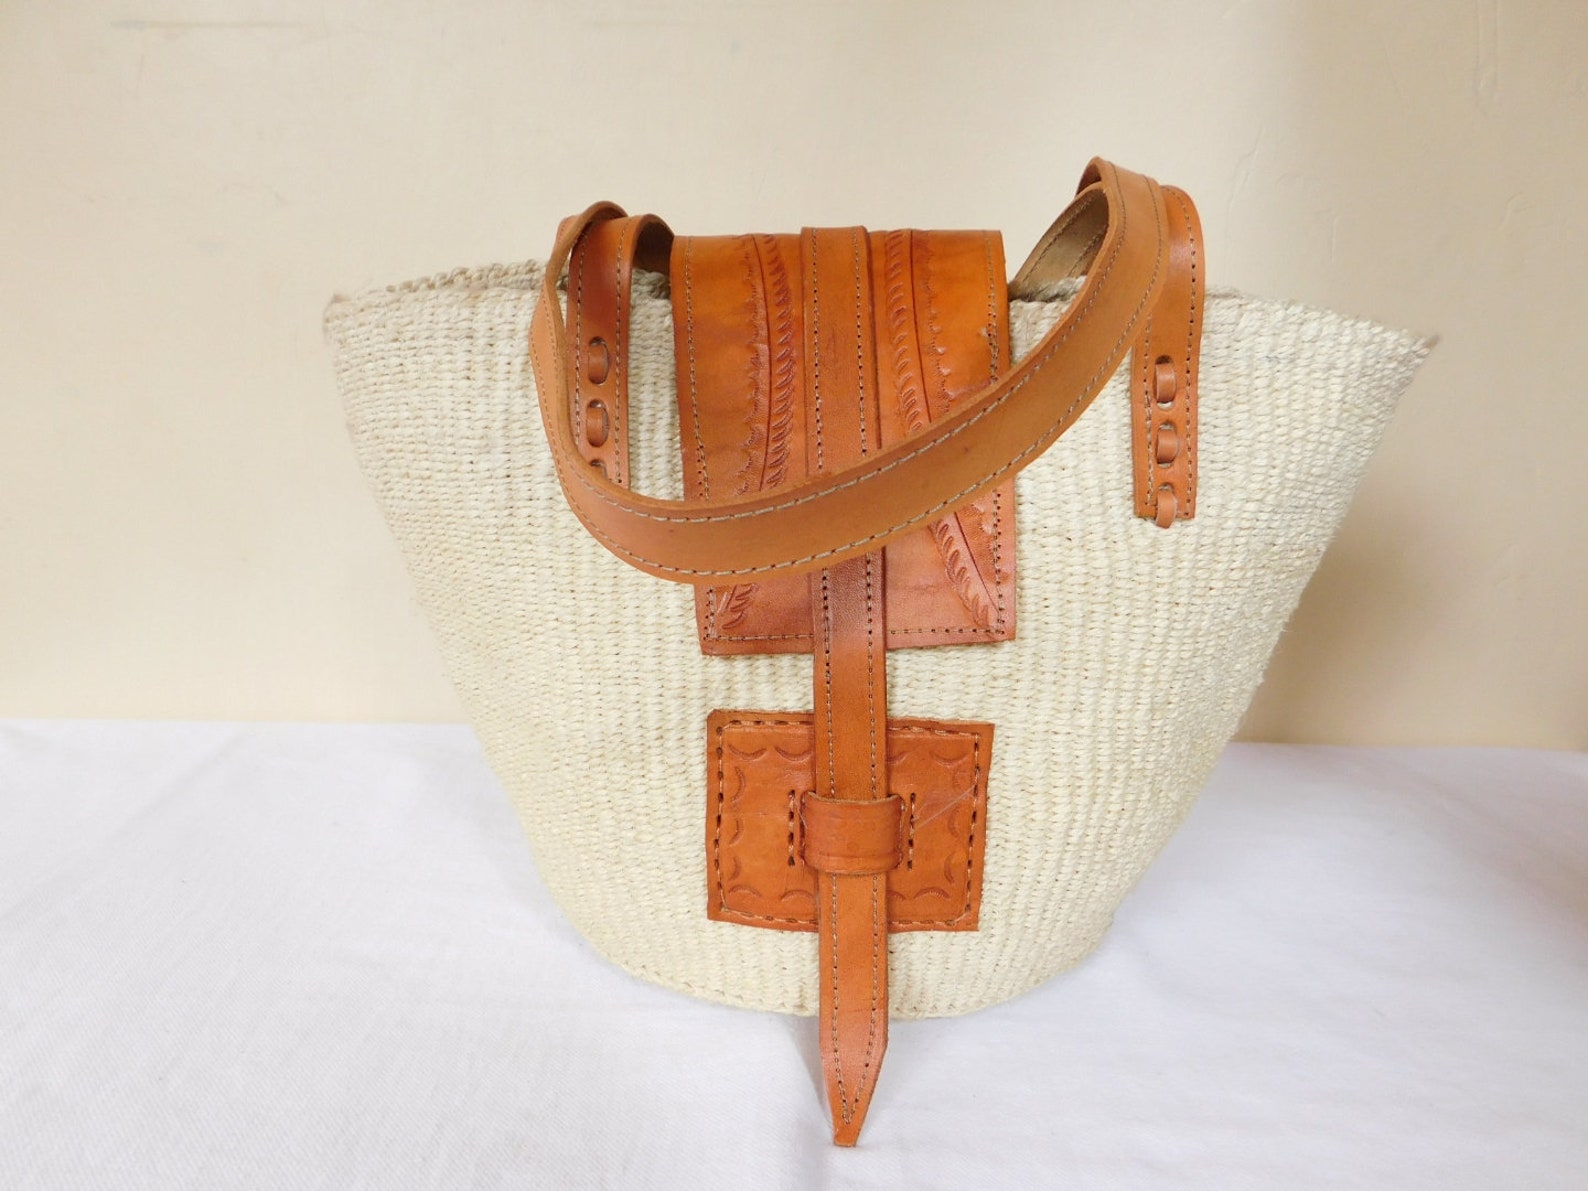 Hand Woven Sisal Tote Bag in Natural Color. - Etsy